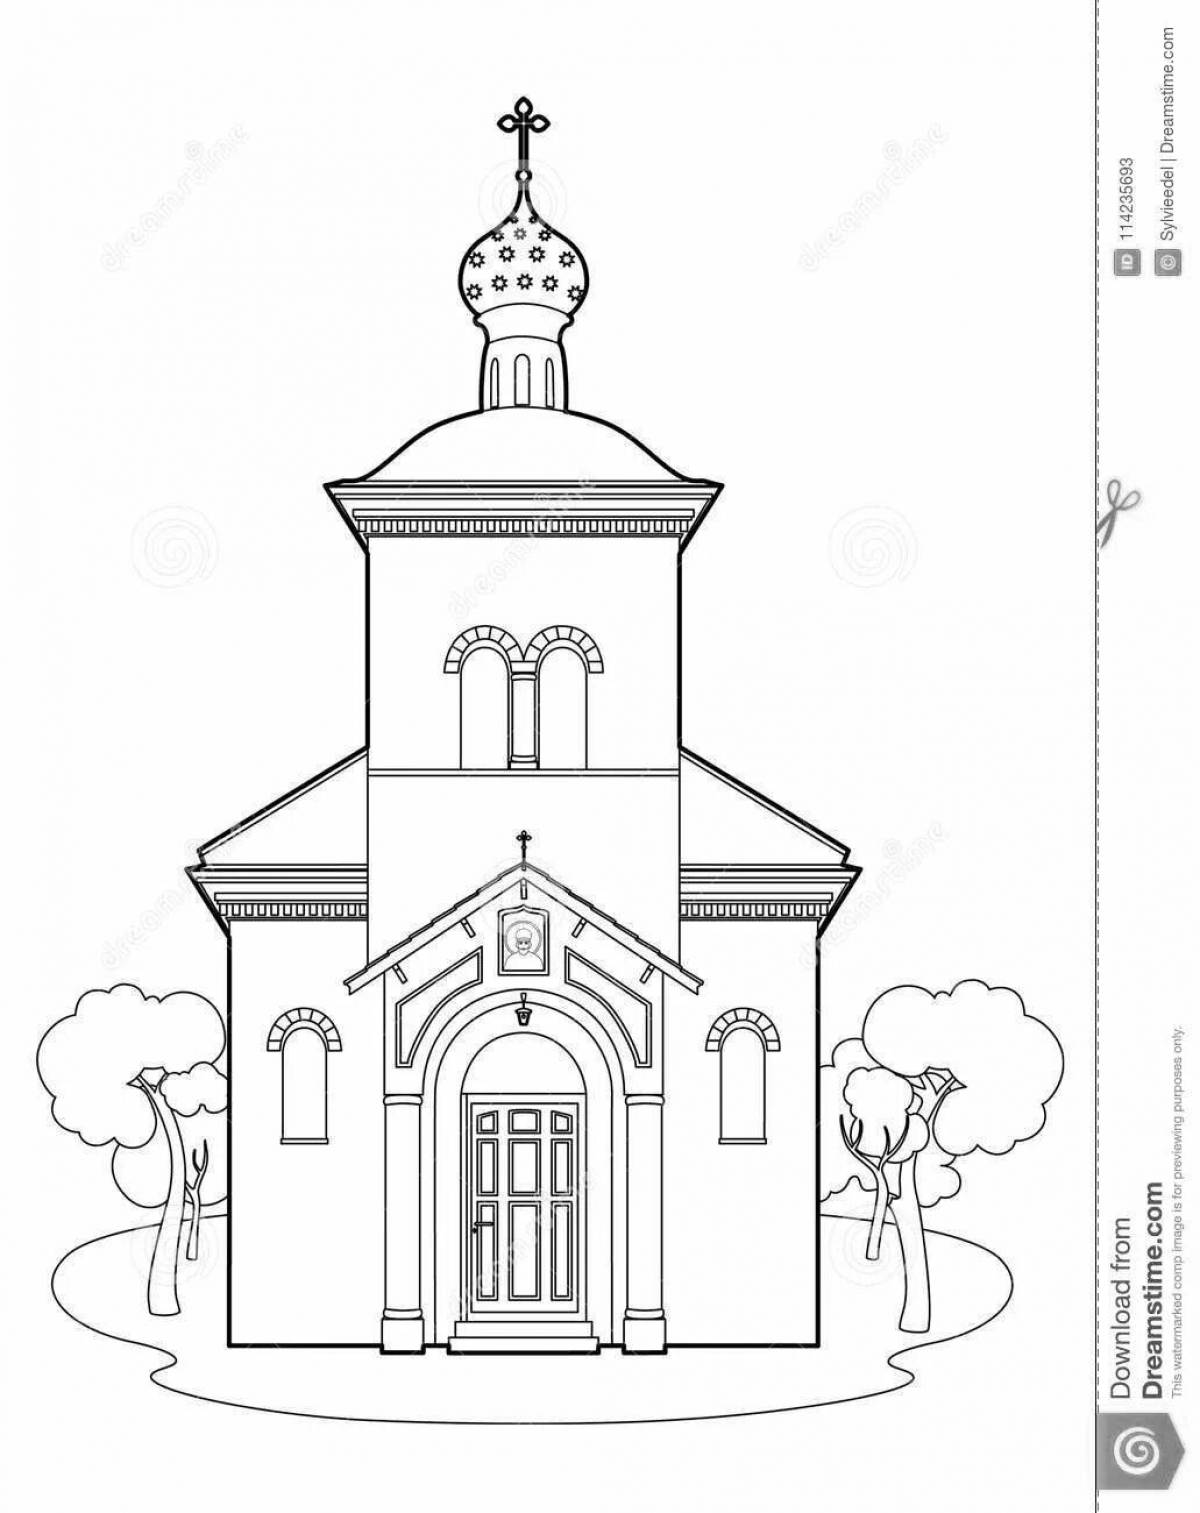 A fun Orthodox coloring book for kids